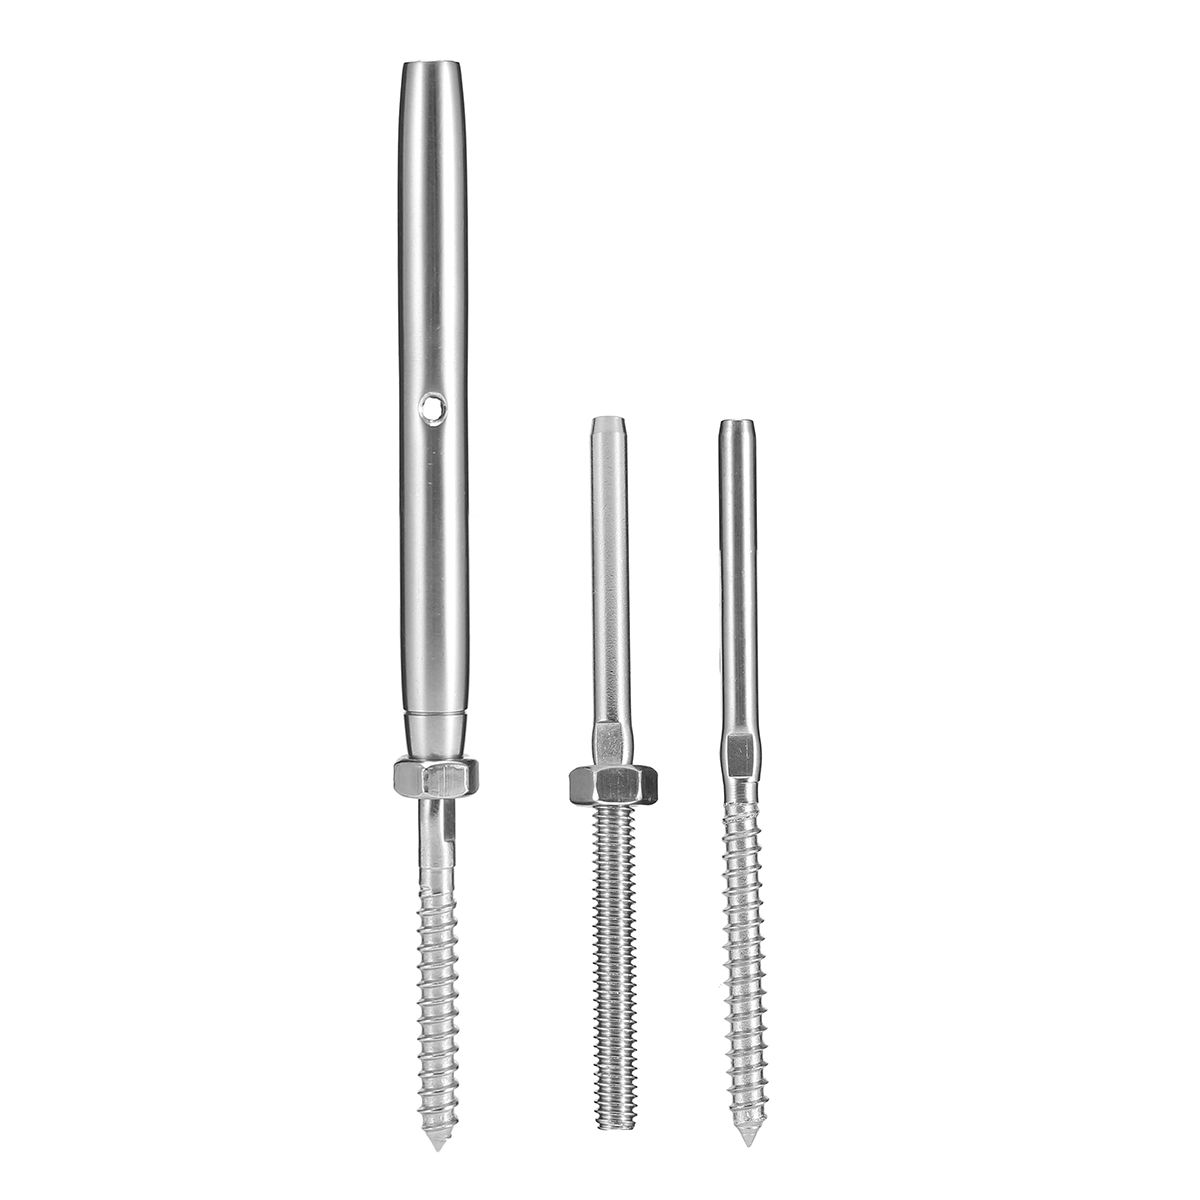 316-Stainless-Steel-Stud-Swage-Tensioner-with-Lag-Screw-Set-for-18quot-Cable-Railing-Rail-1214335